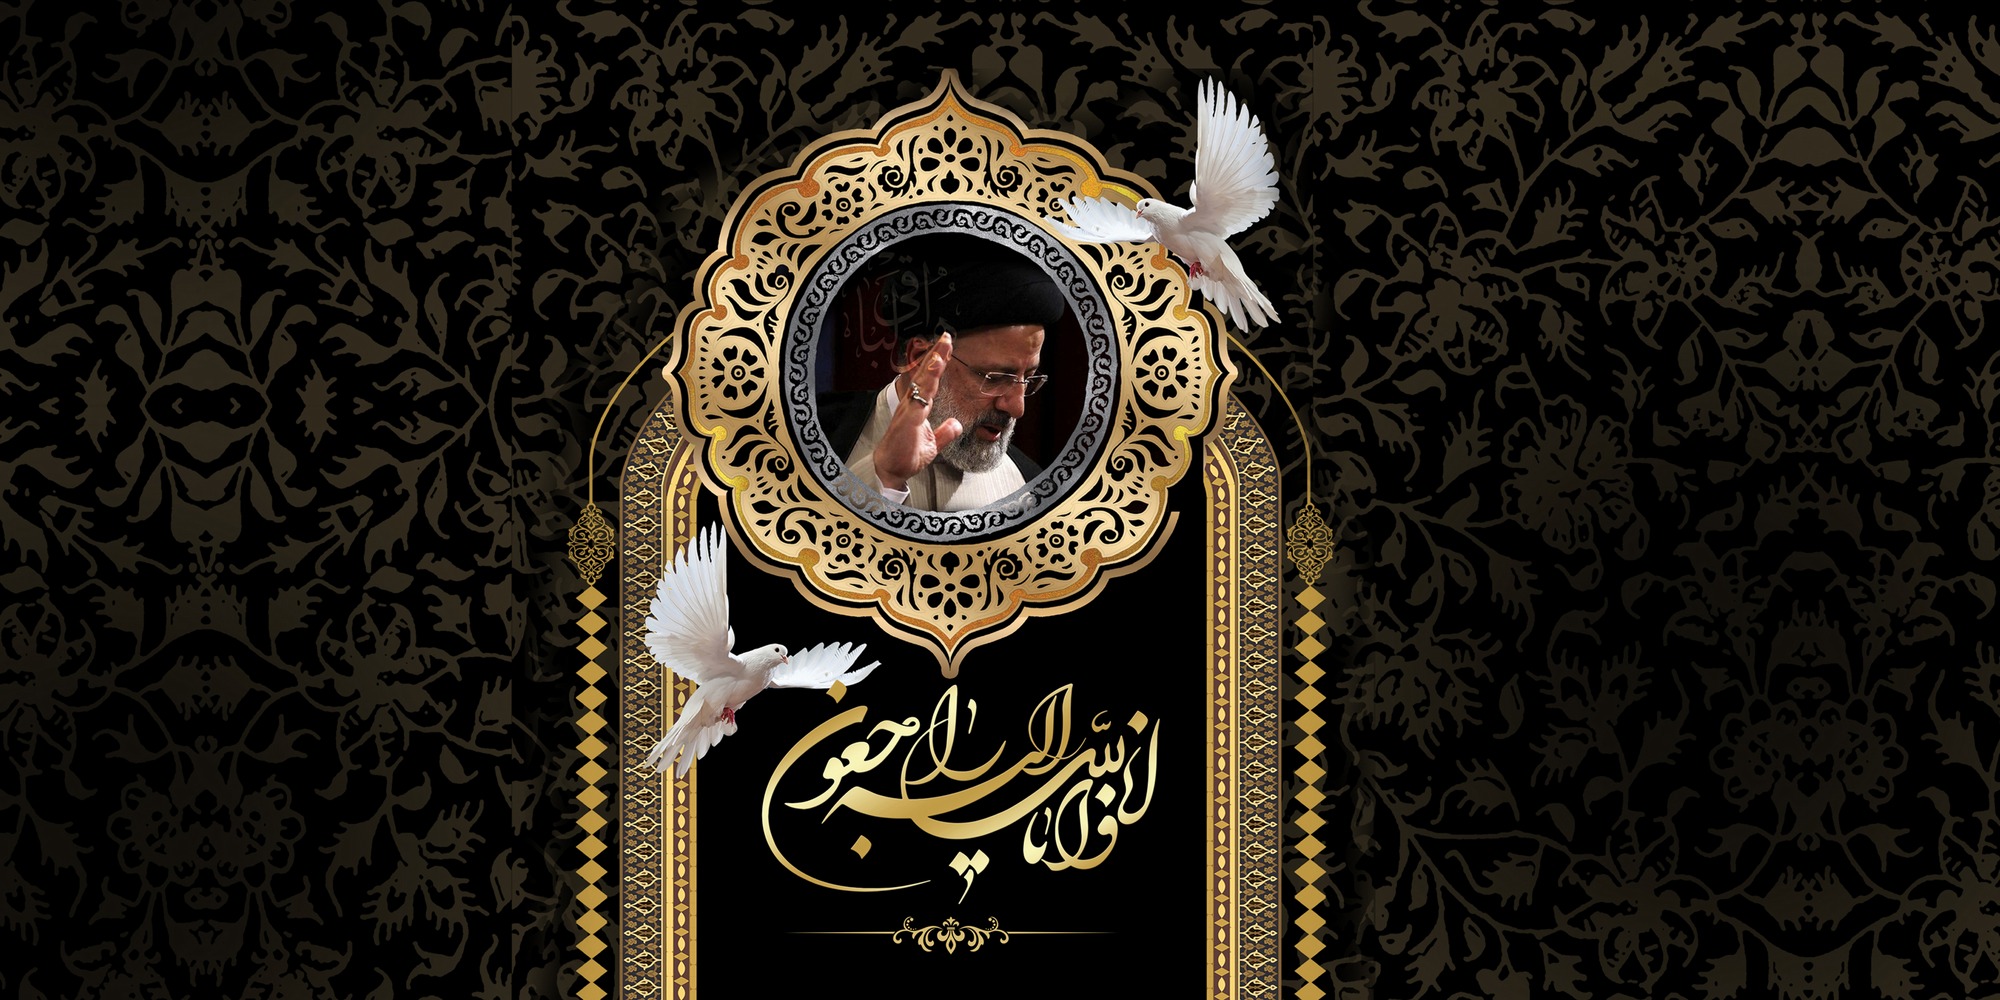 We are deeply saddened by the martyrdom of Ayatollah Seyyed Ebrahim Raeisi, the President of Iran, along with Mr. Amir-Abdollahian, the Minister of Foreign Affairs, and their associates